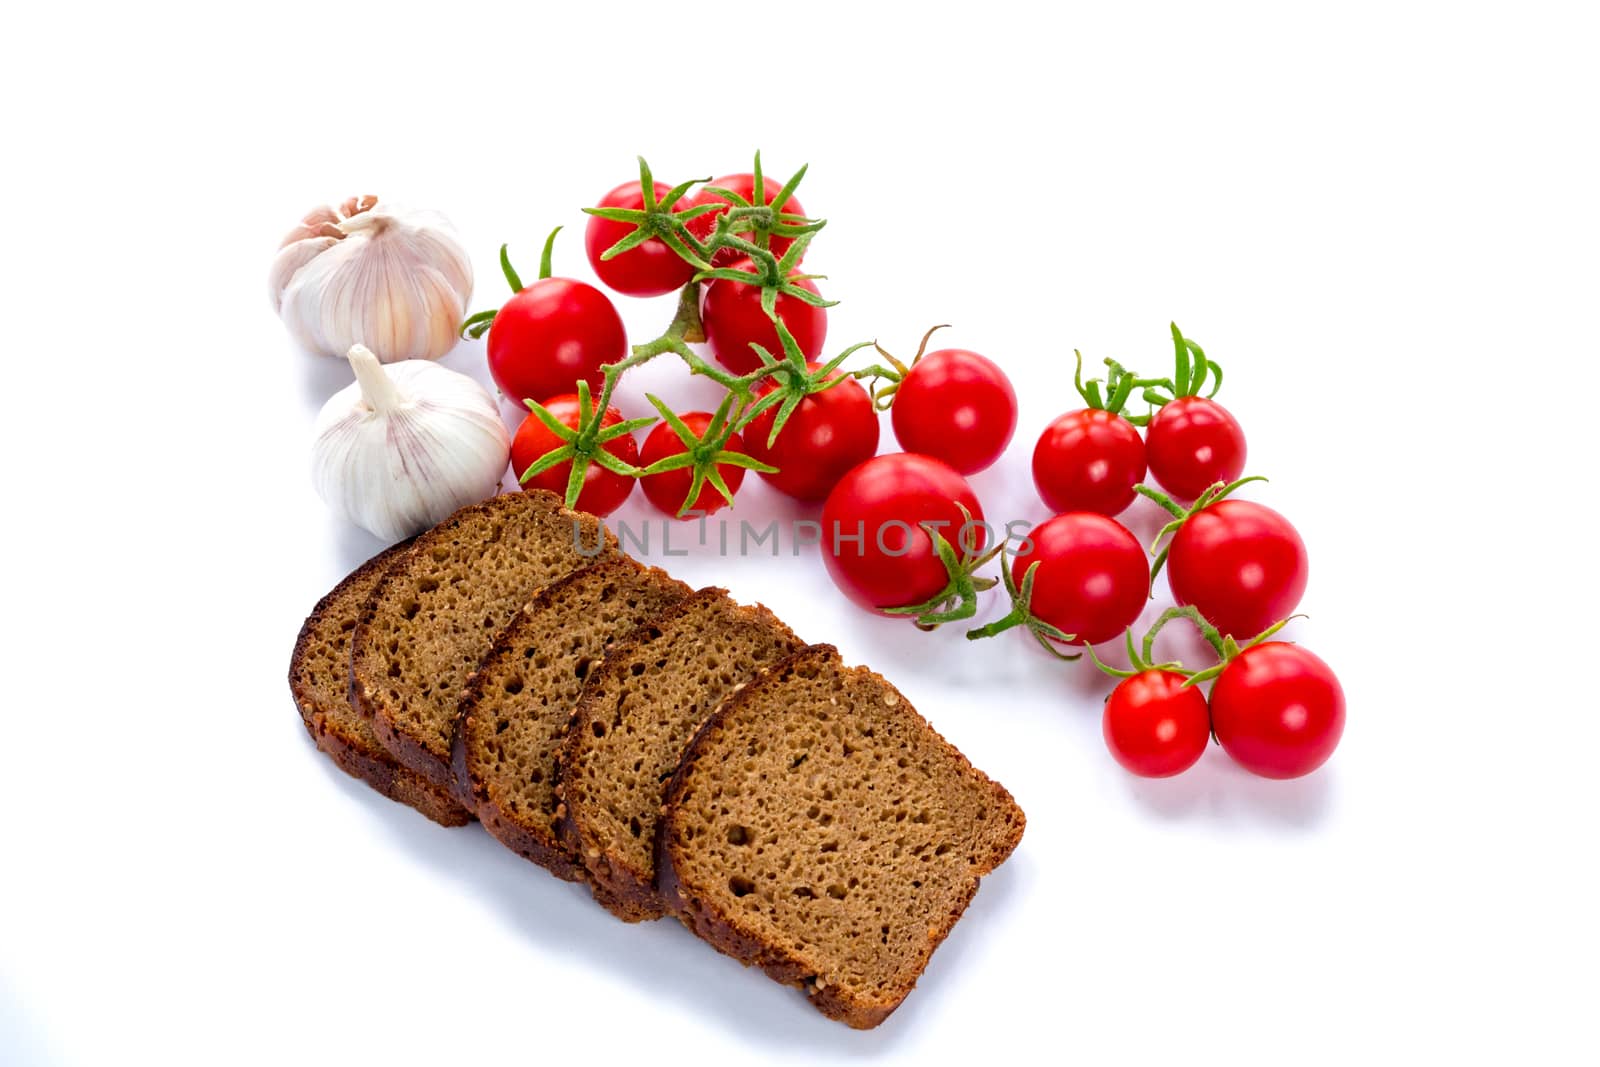 Set of black bread slices, cherry tomatoes and garlic